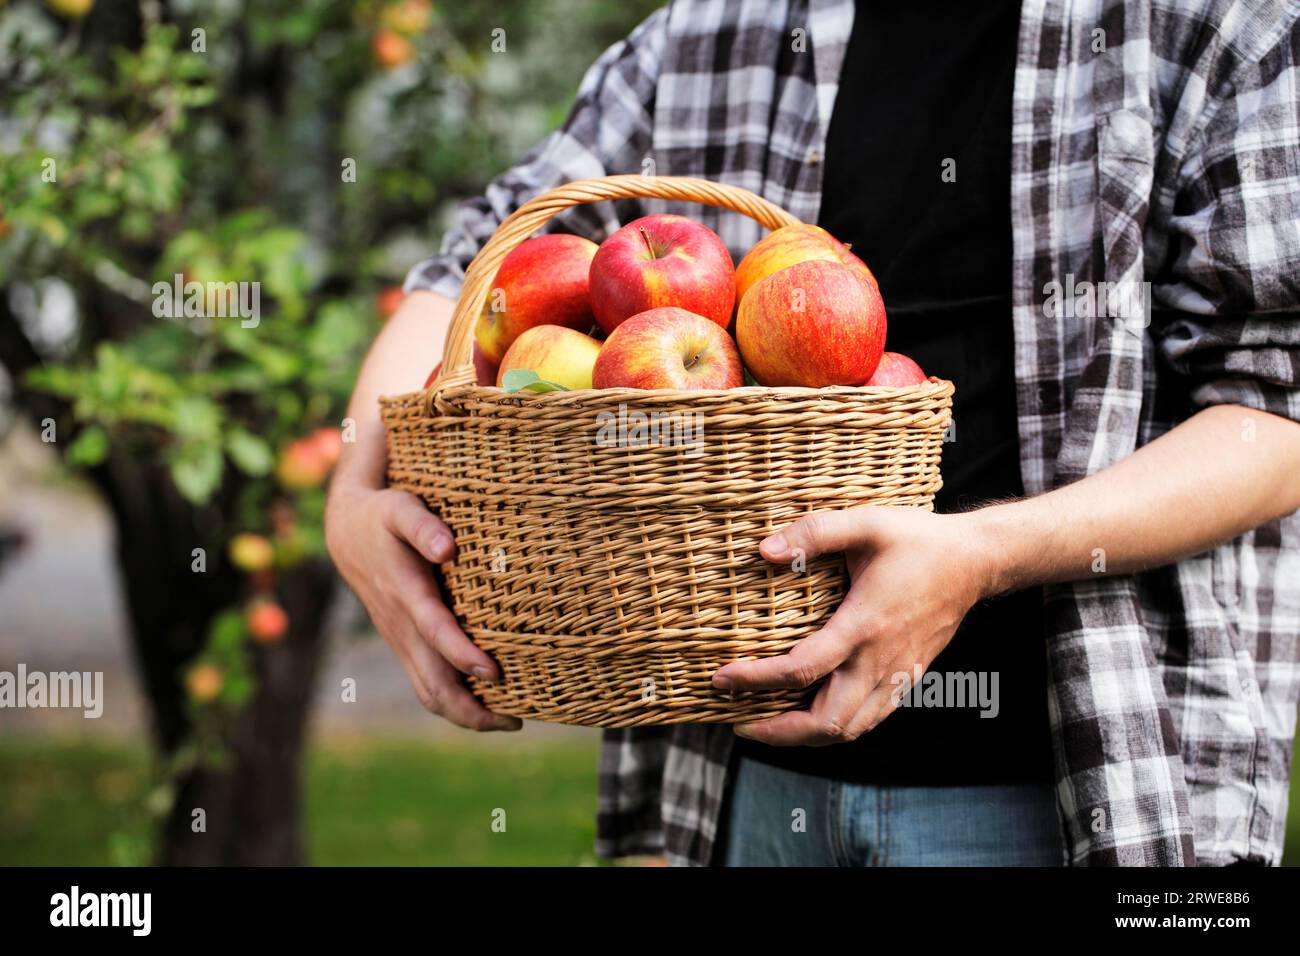 Farmer holding harvested apples in a wicker basket Stock Photo